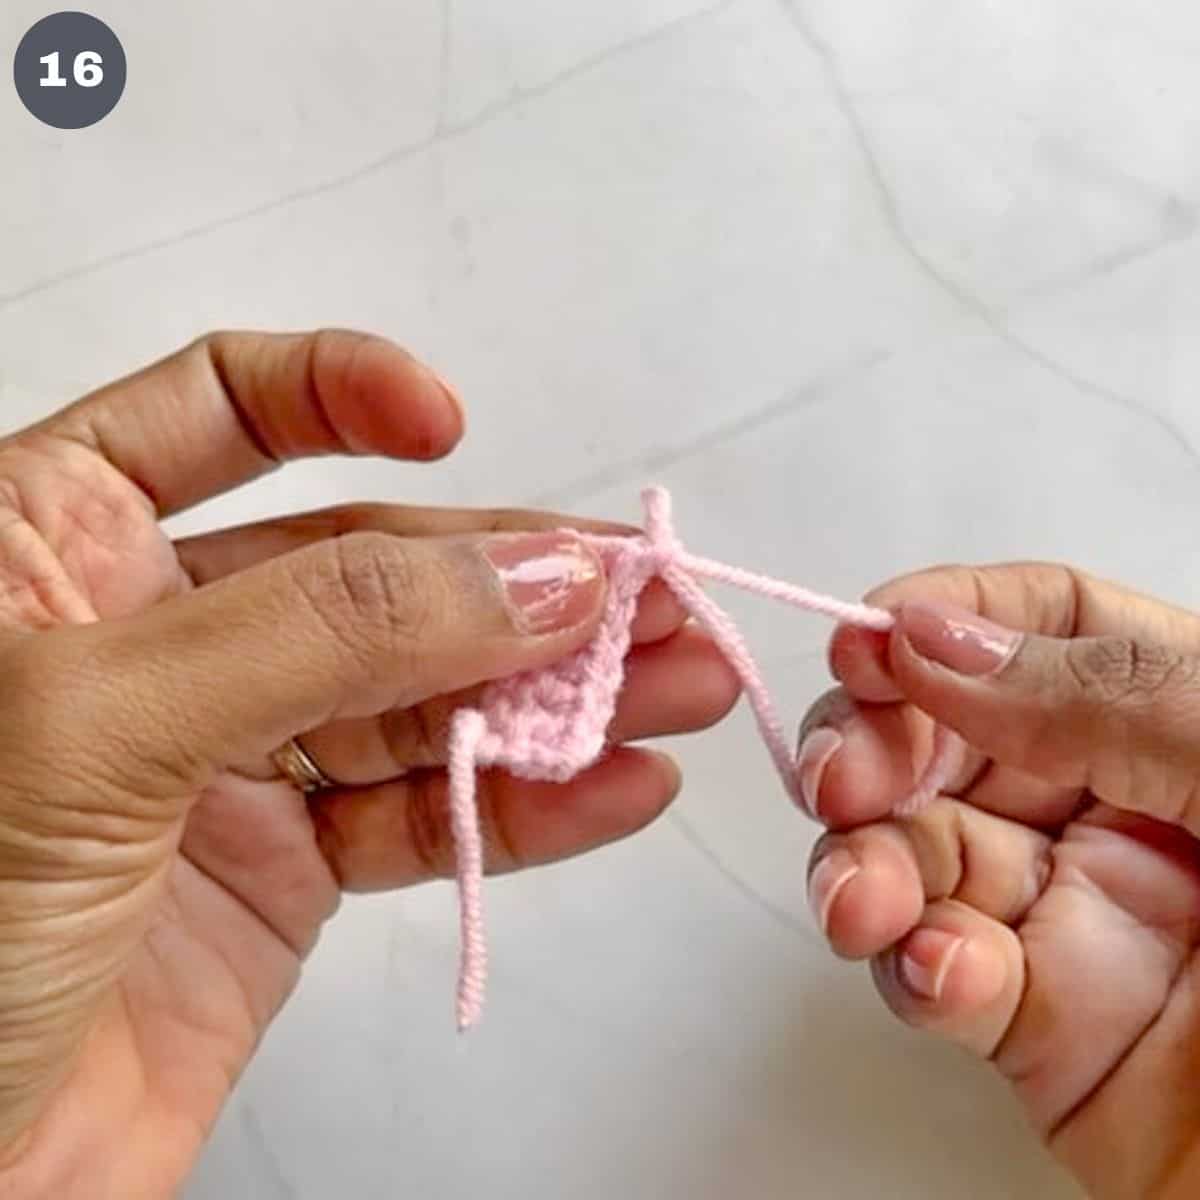 Pulling a pink crochet yarn to fasten stiches.